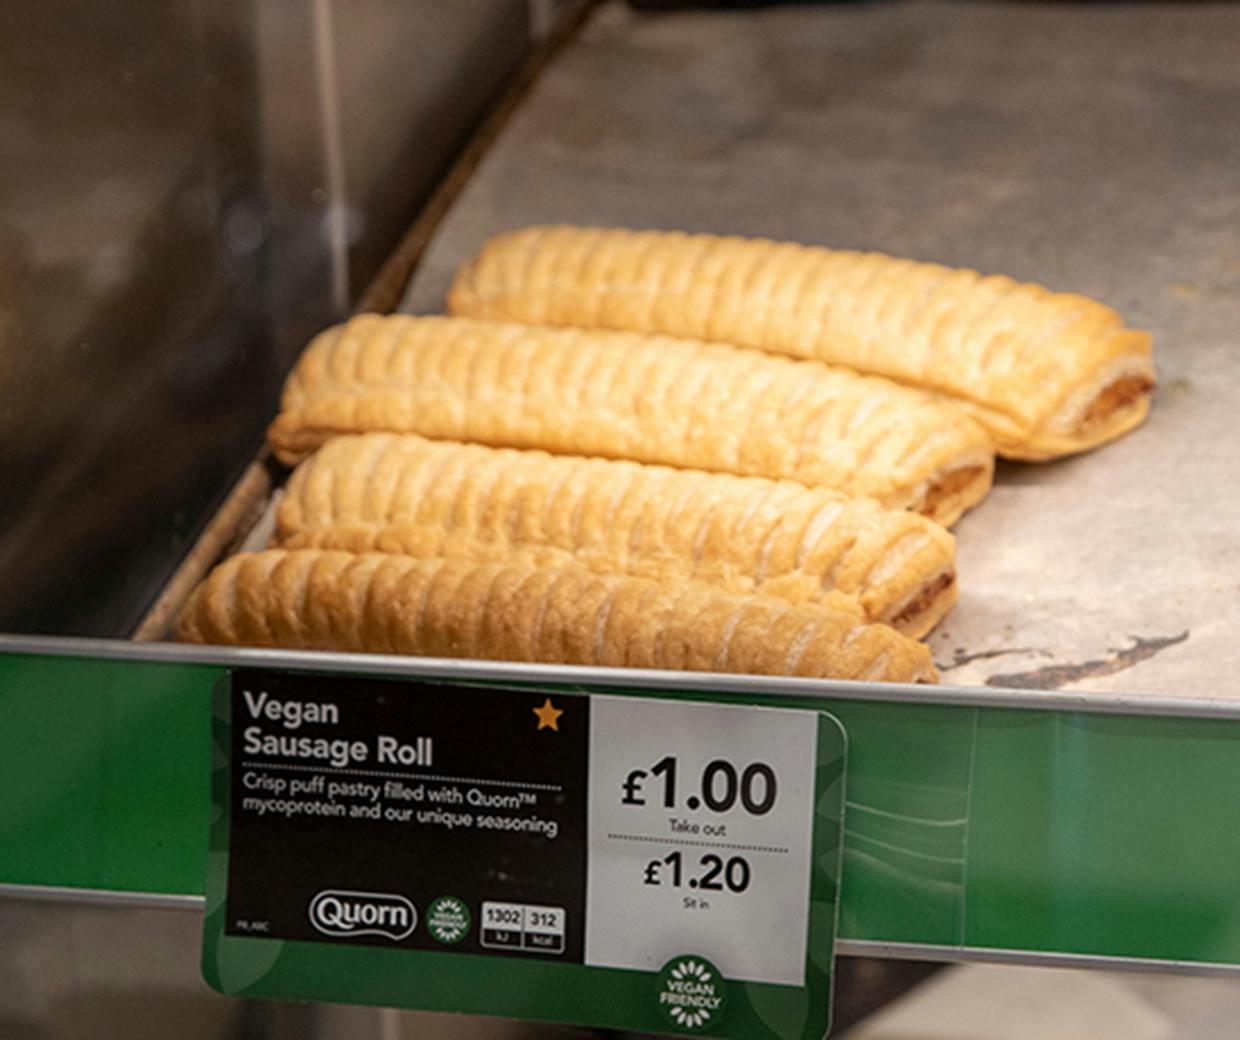 How did the vegan sausage roll get so popular?